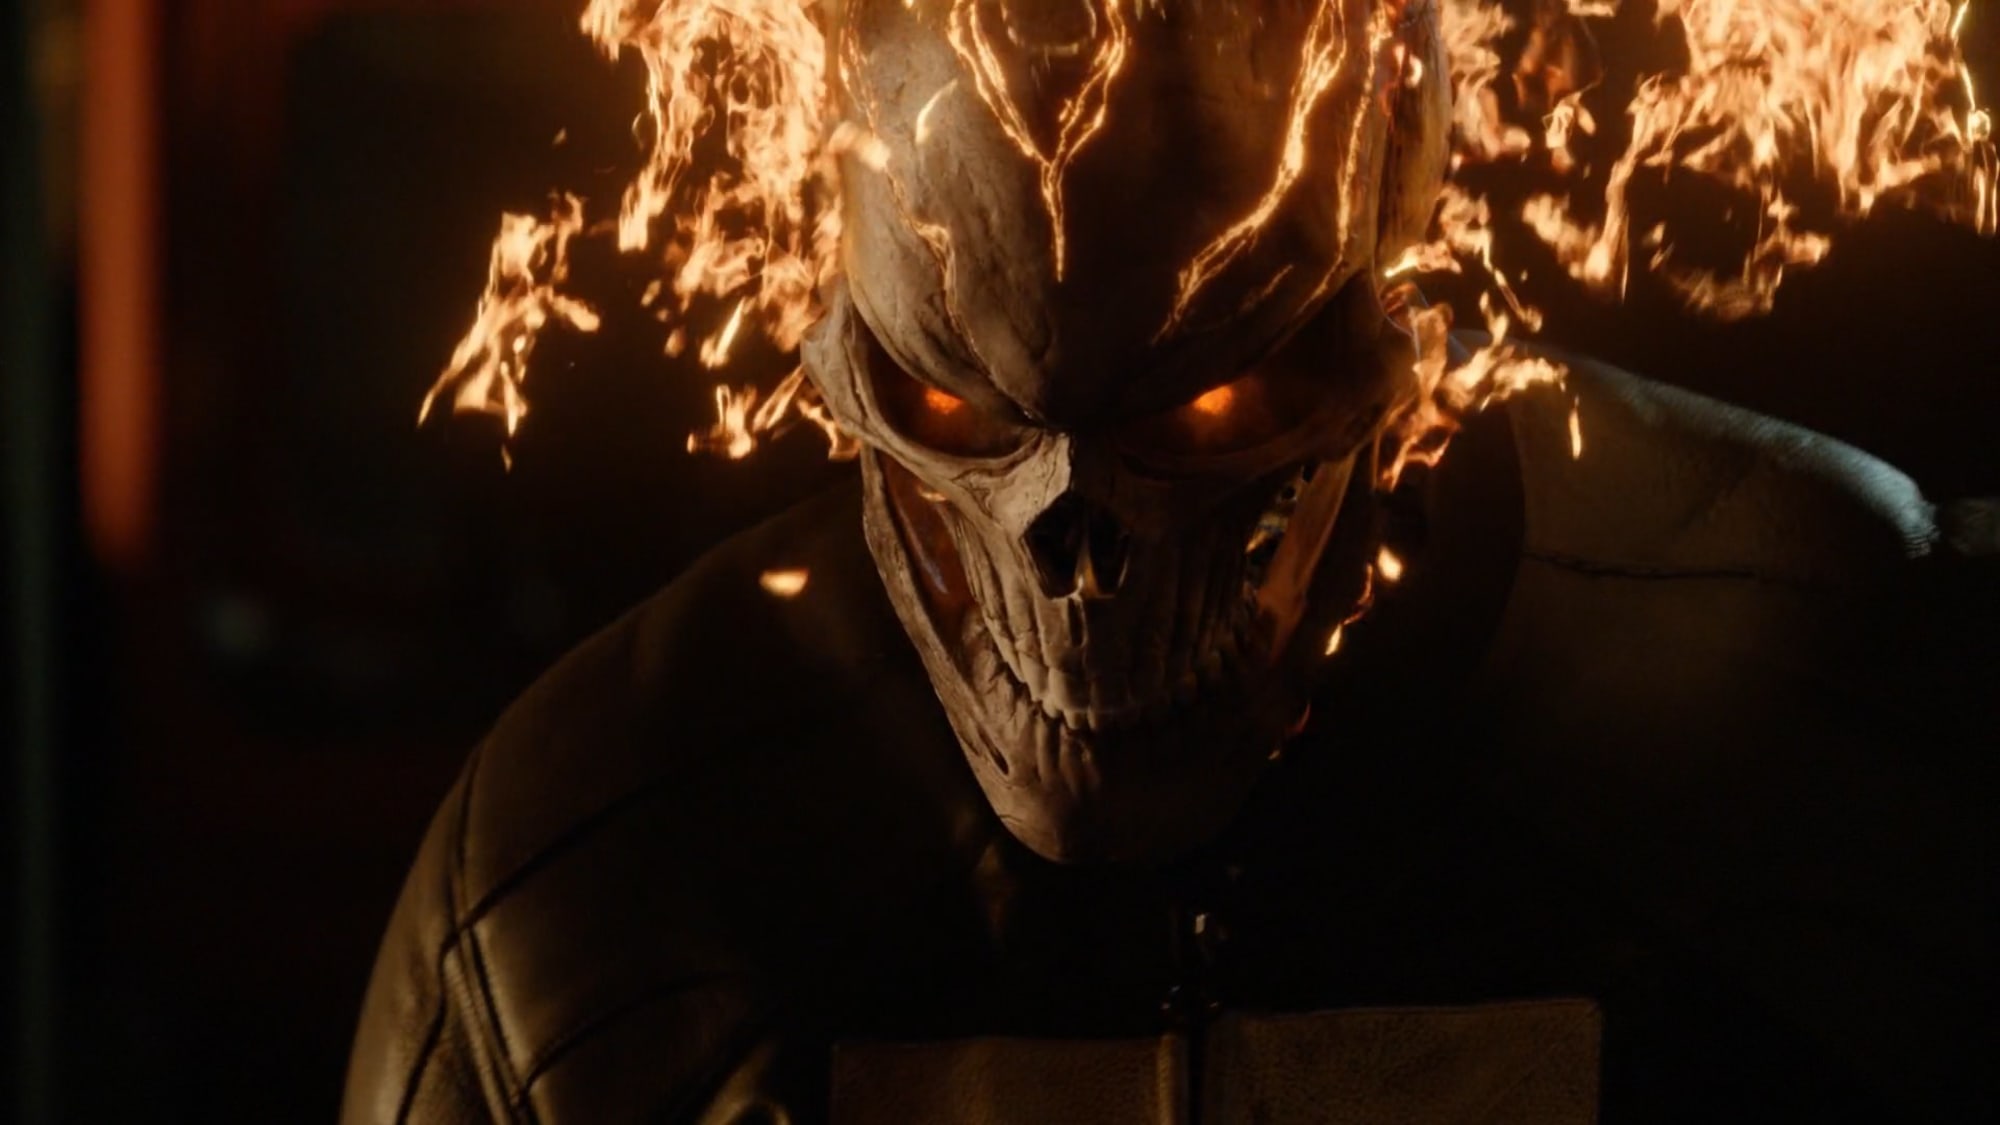 ghost rider agents of shield uncle eli